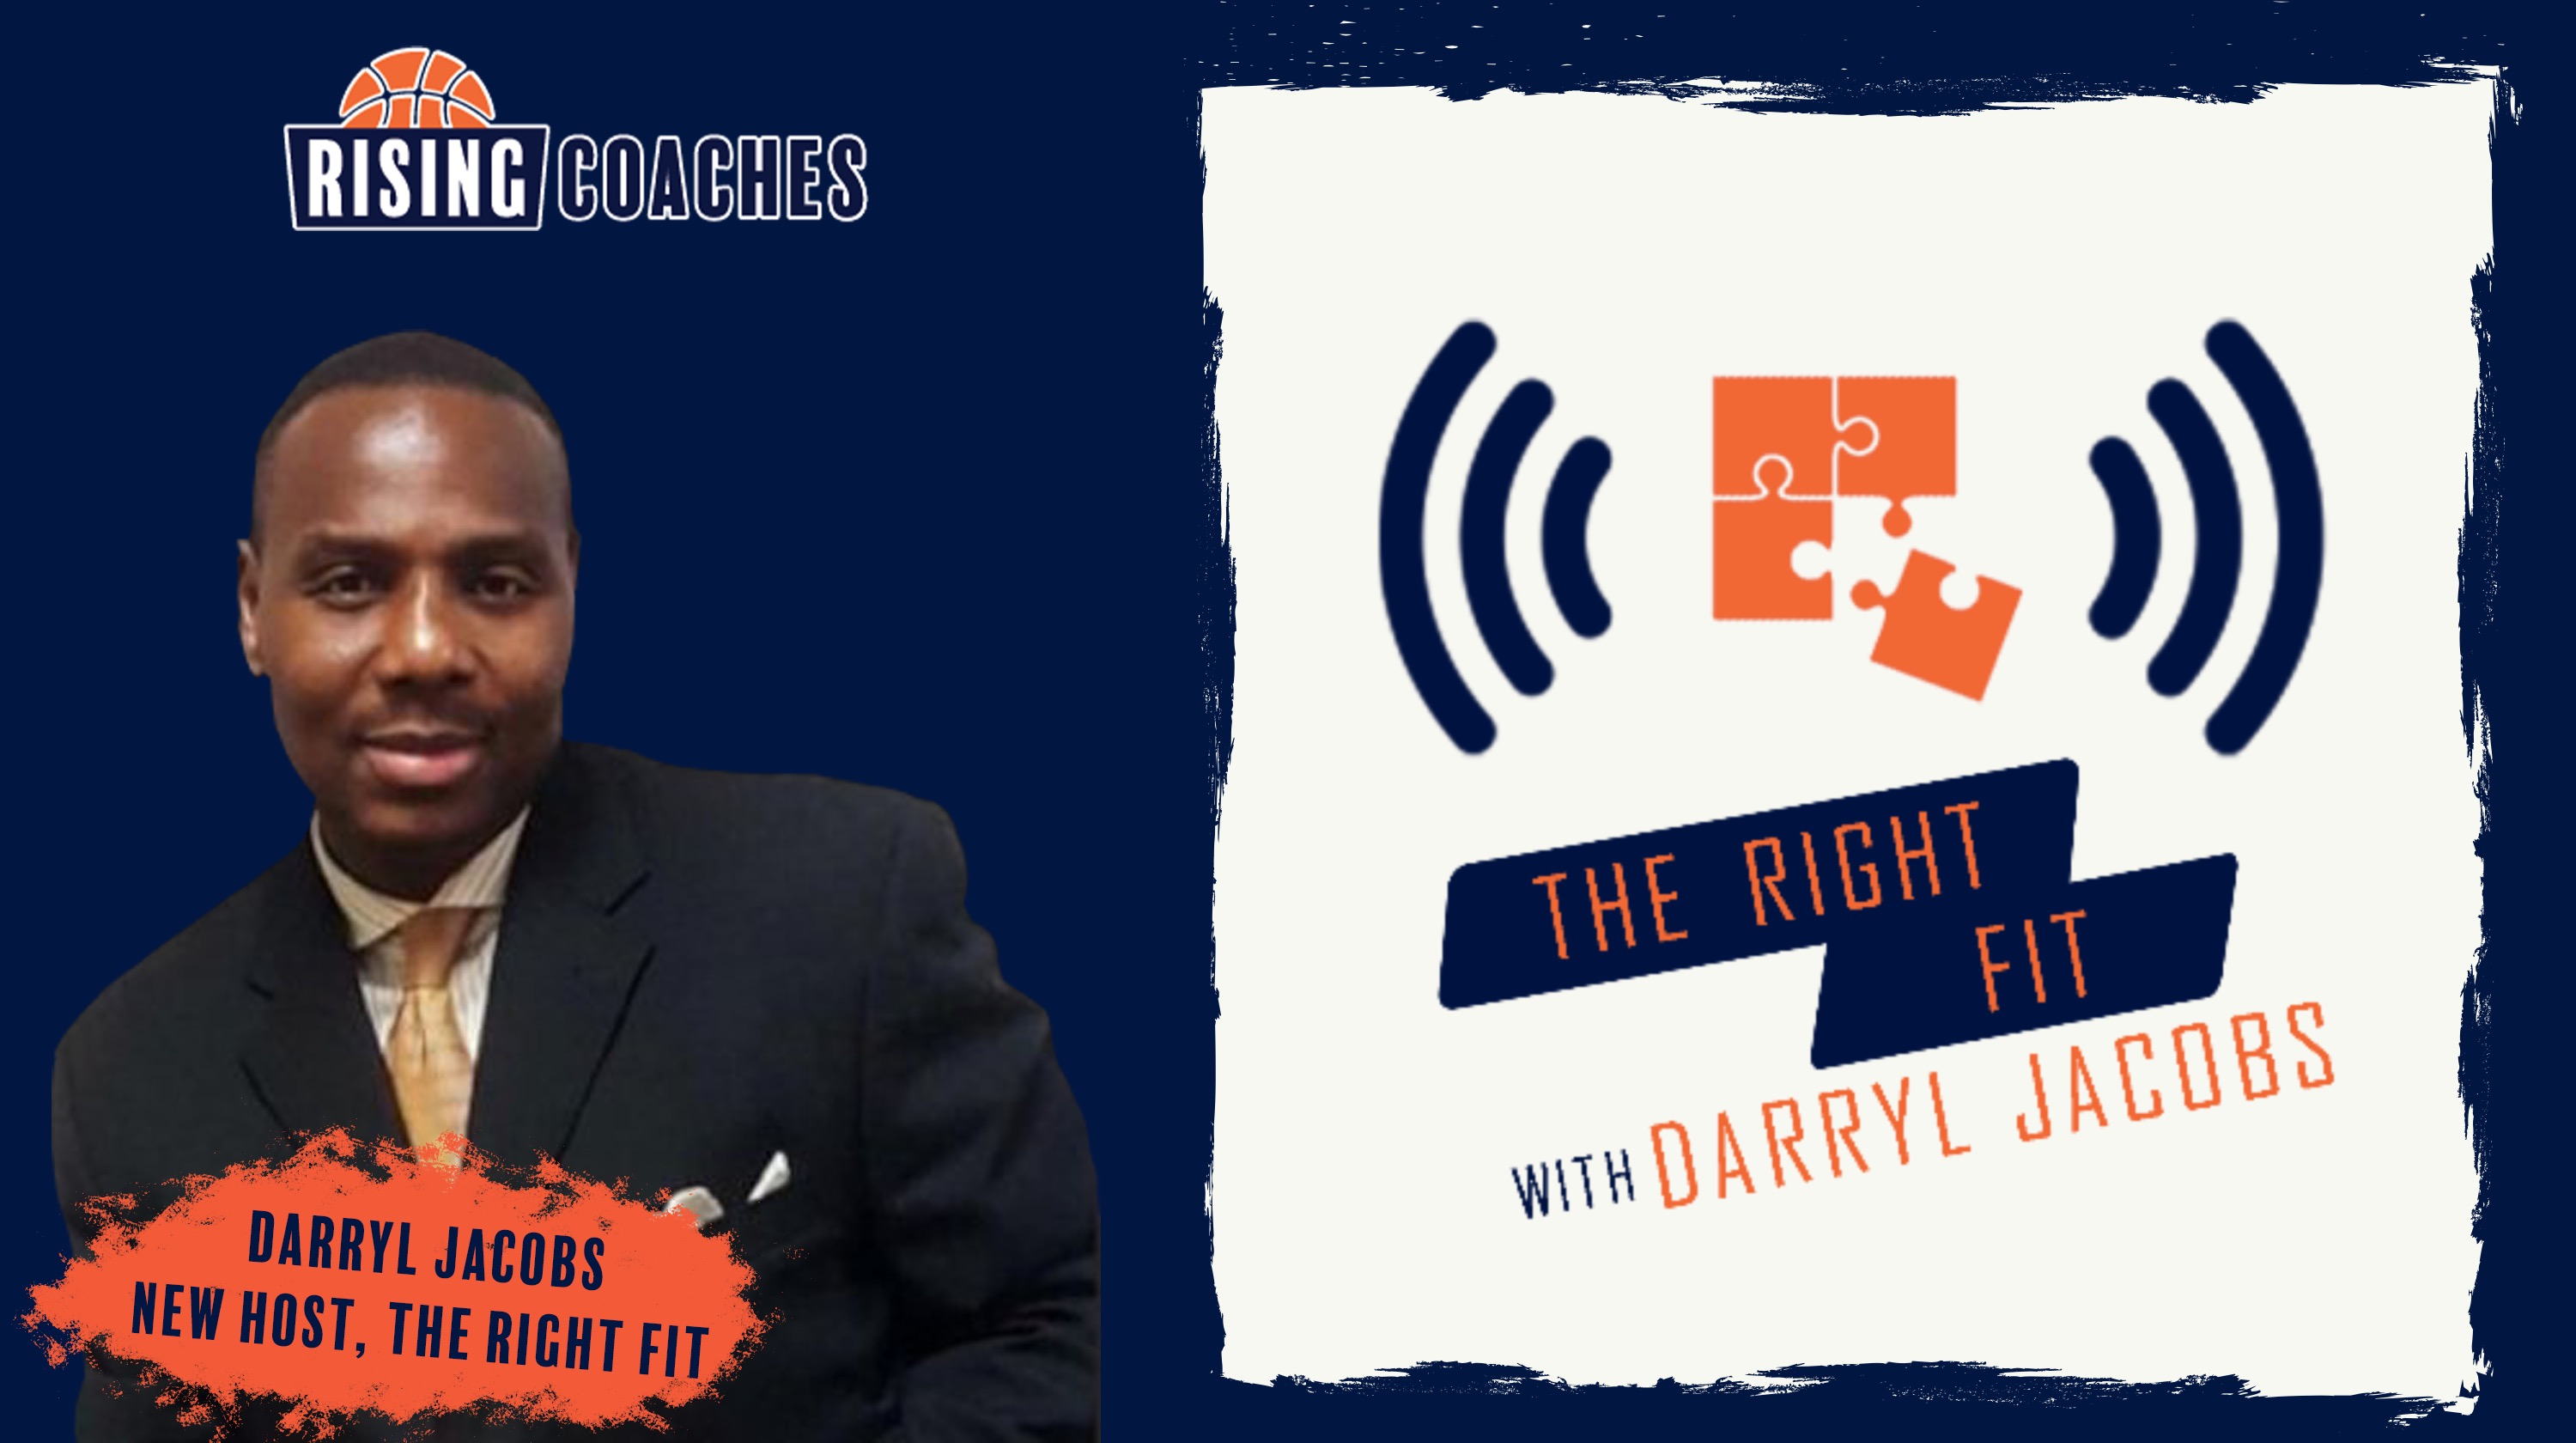 The Right Fit Podcast Returns with New Host Darryl Jacobs